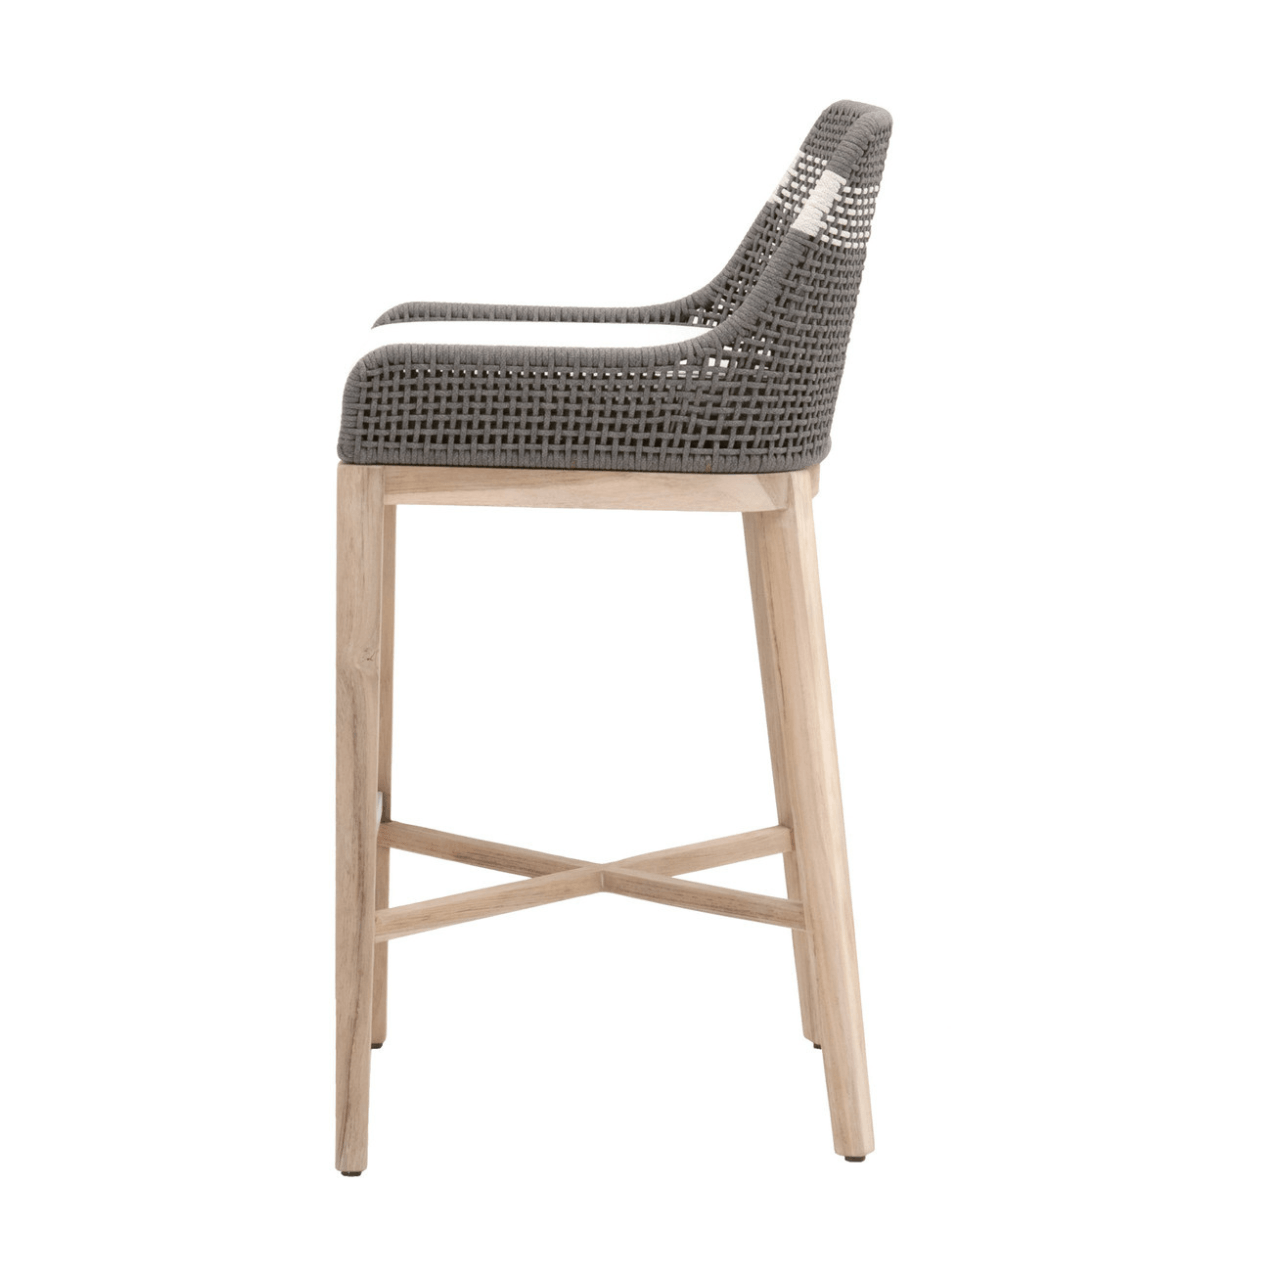 Woven Tapestry Outdoor Bar Stools